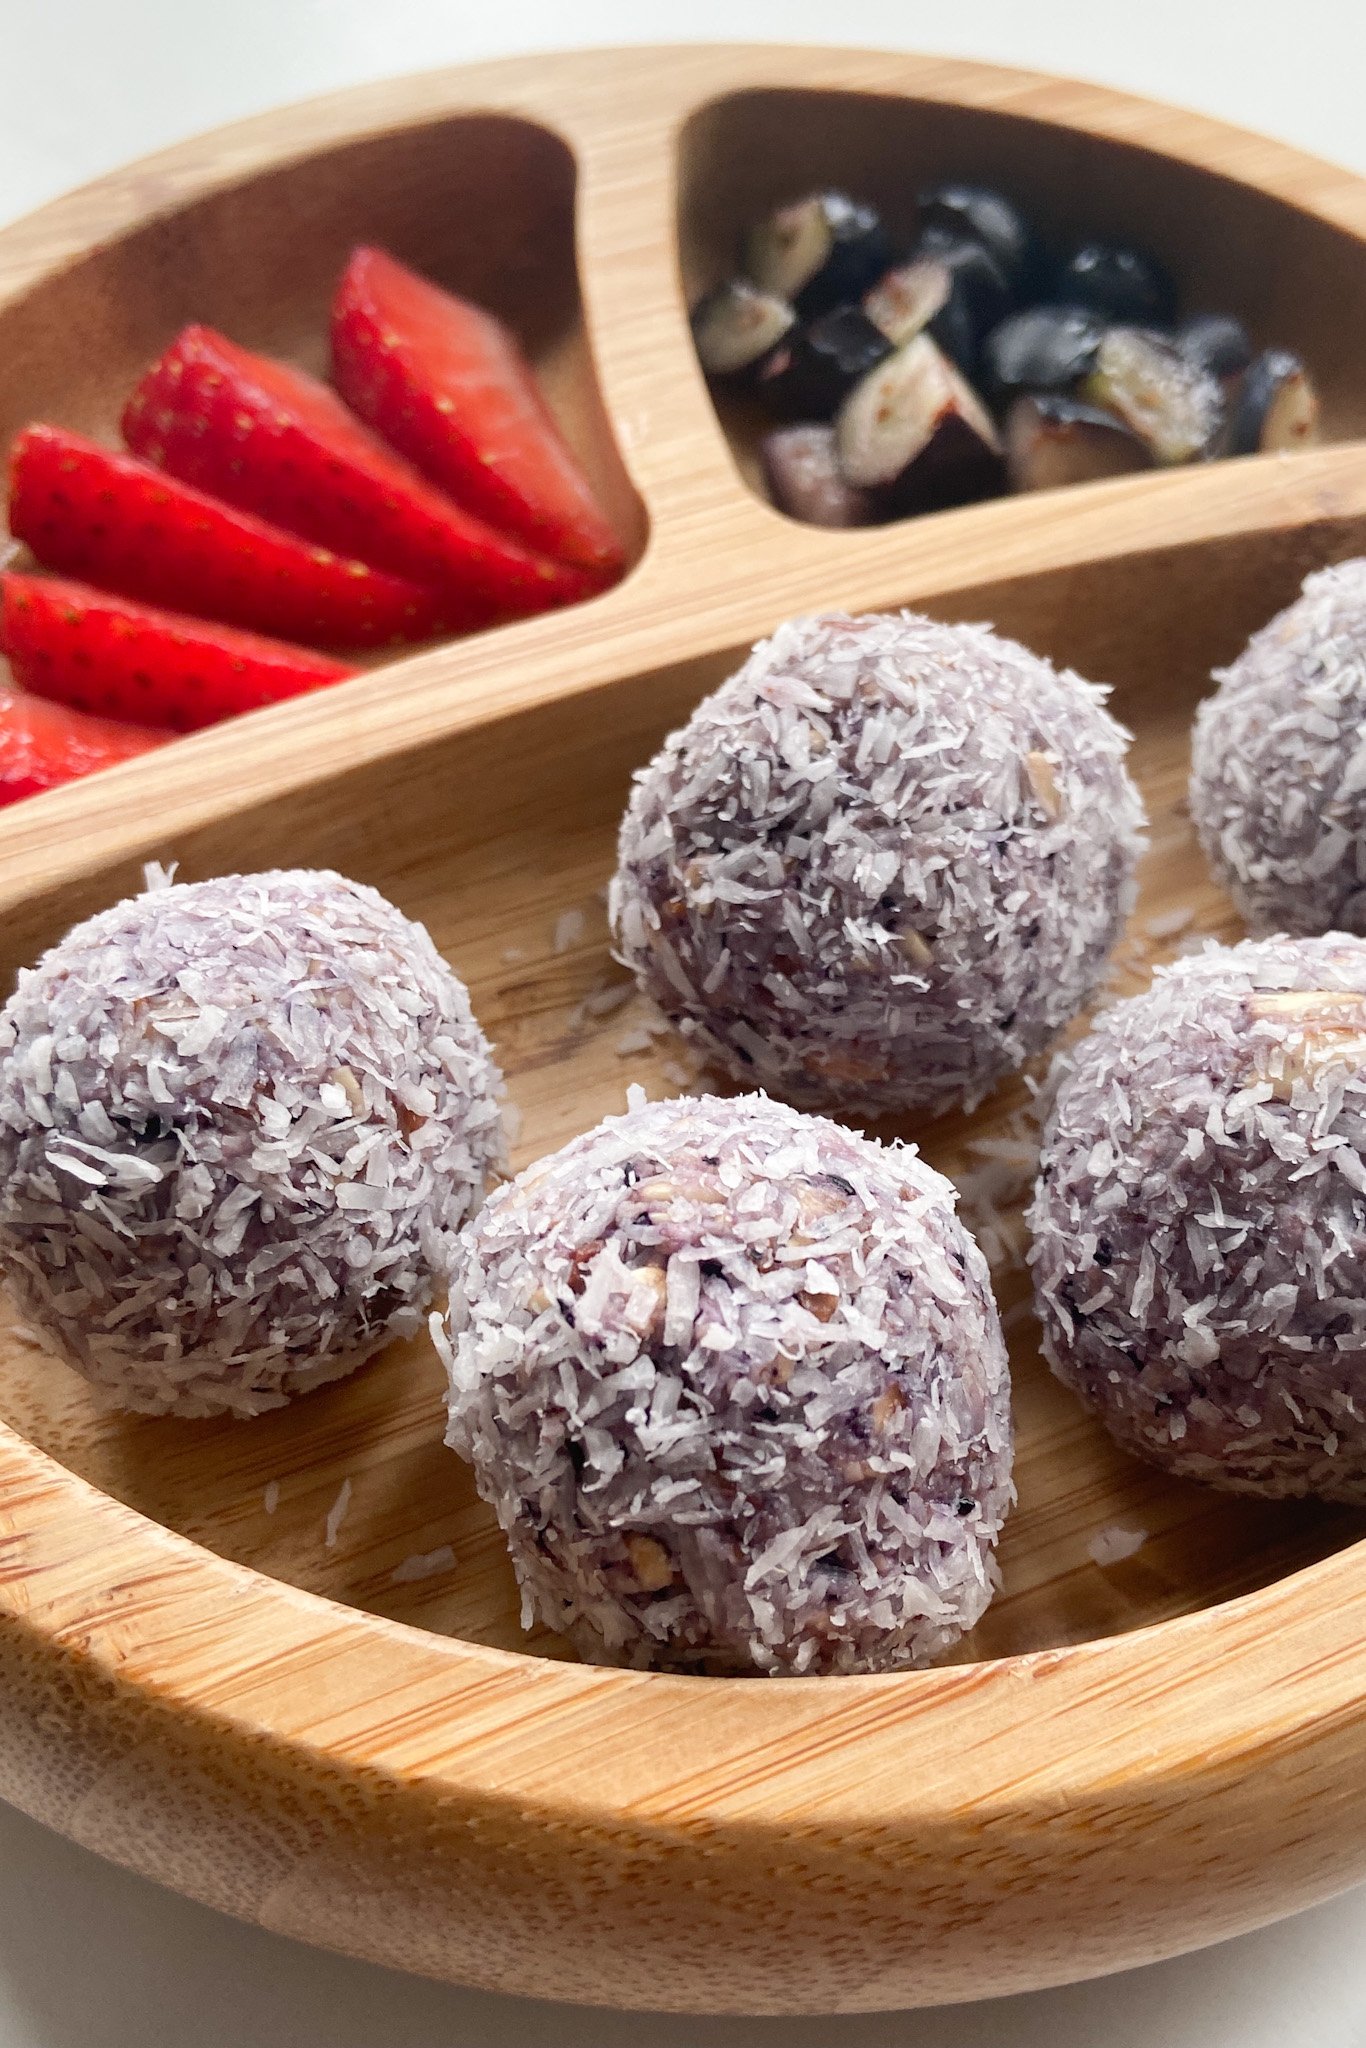 Blueberry bliss balls served with sliced strawberries and blueberries